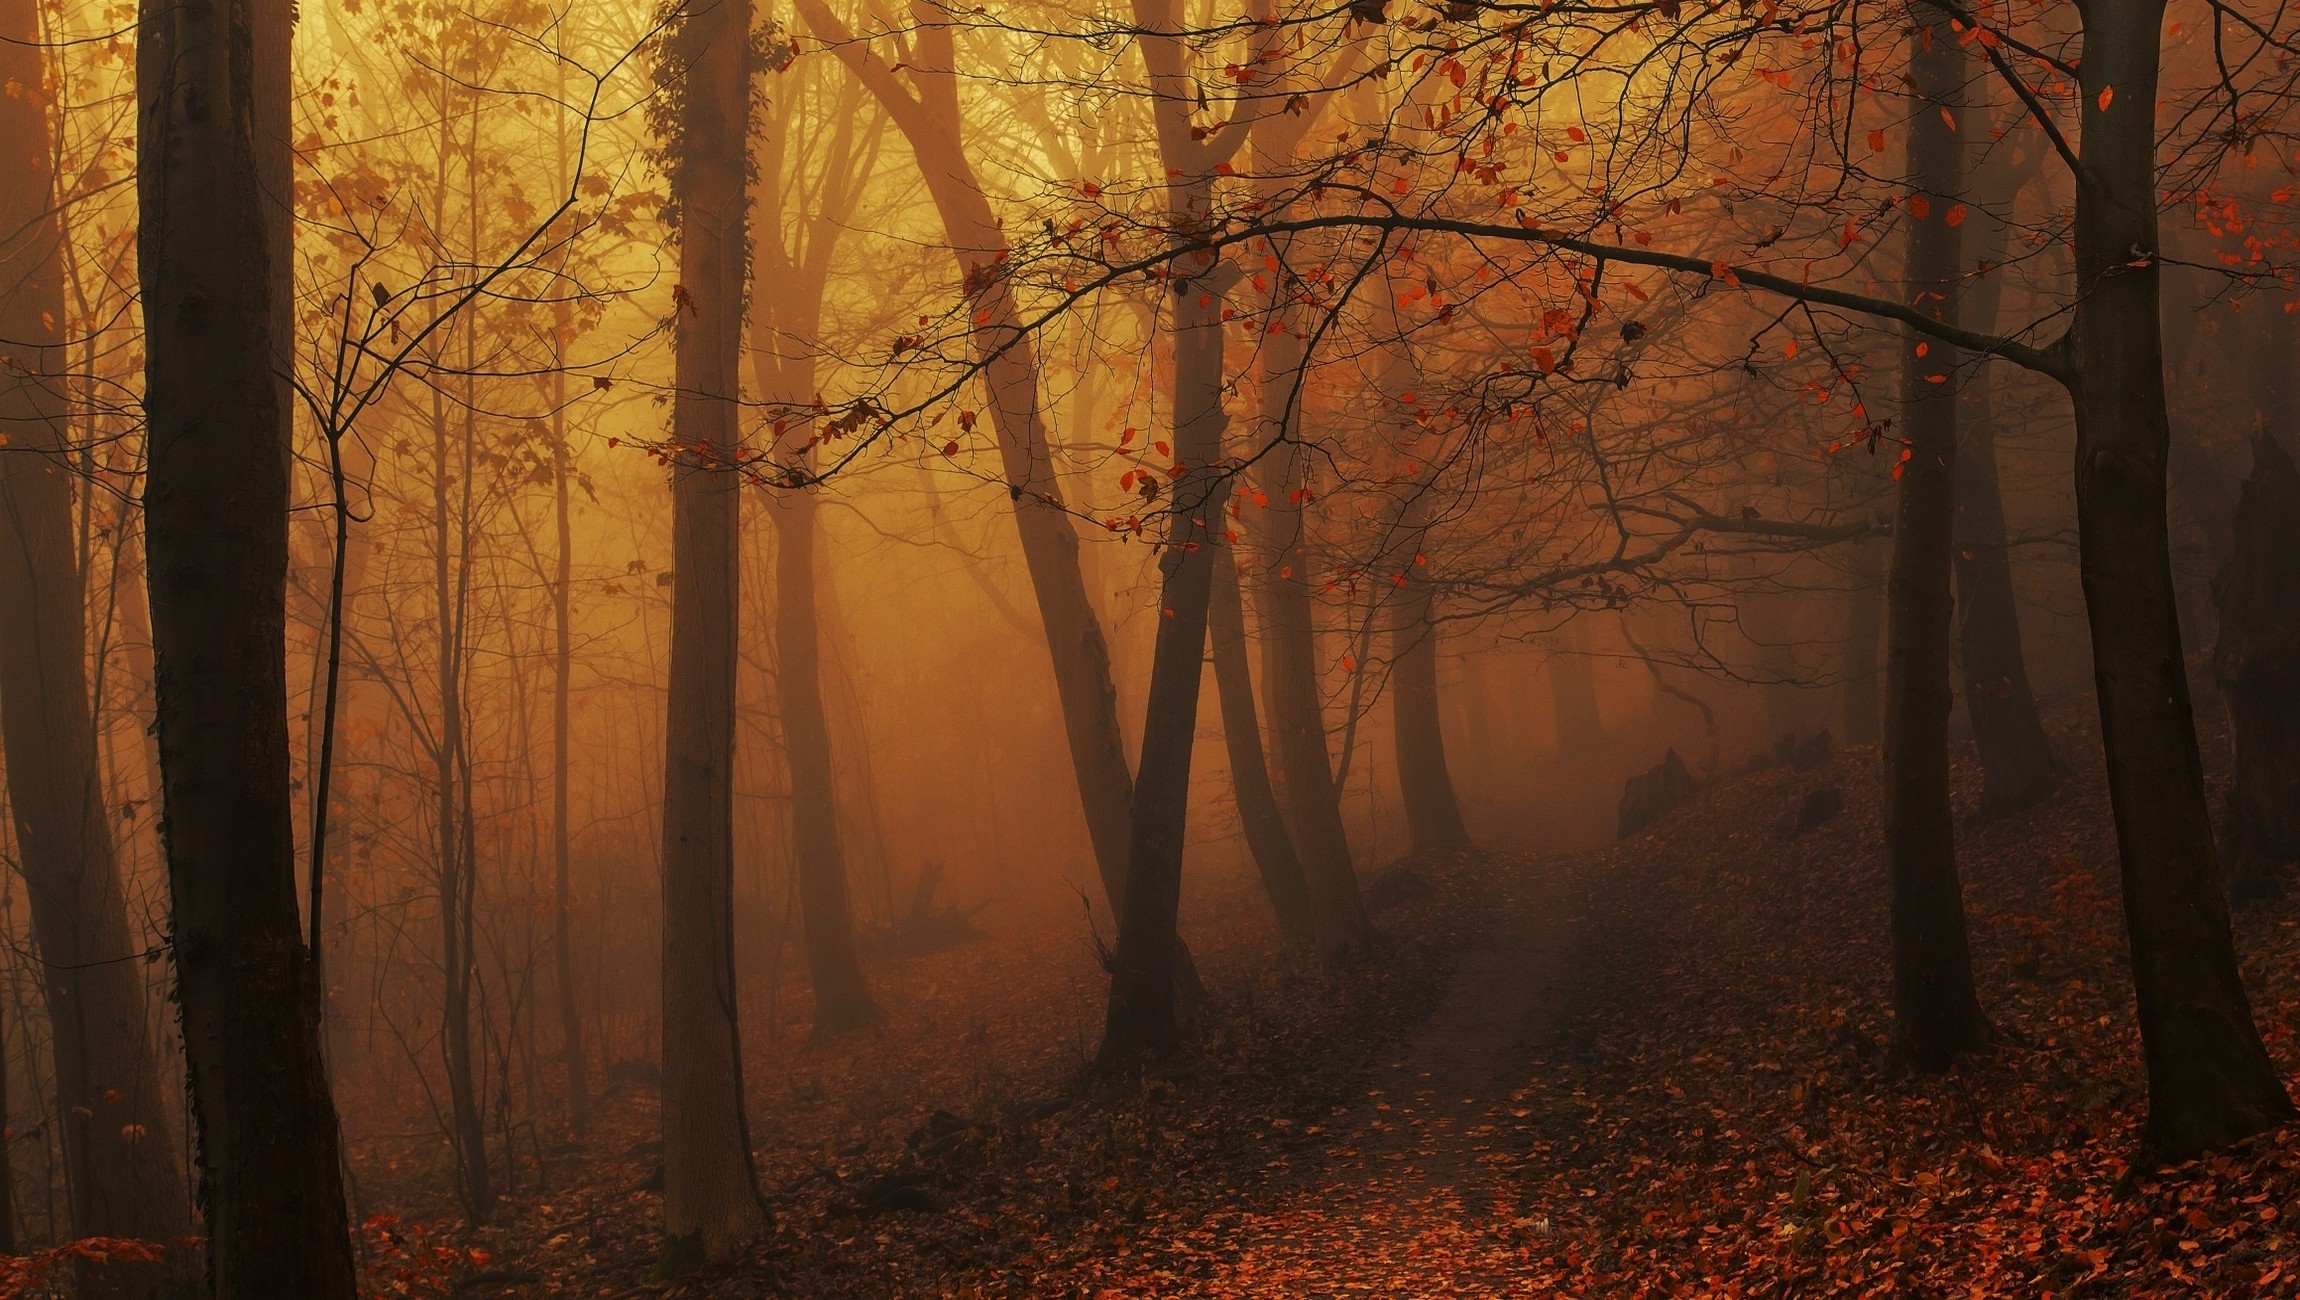 Landscape Nature Forest Mist Fall Leaves Path Trees Atmosphere Morning Sunlight Hills Amber 2300x1300